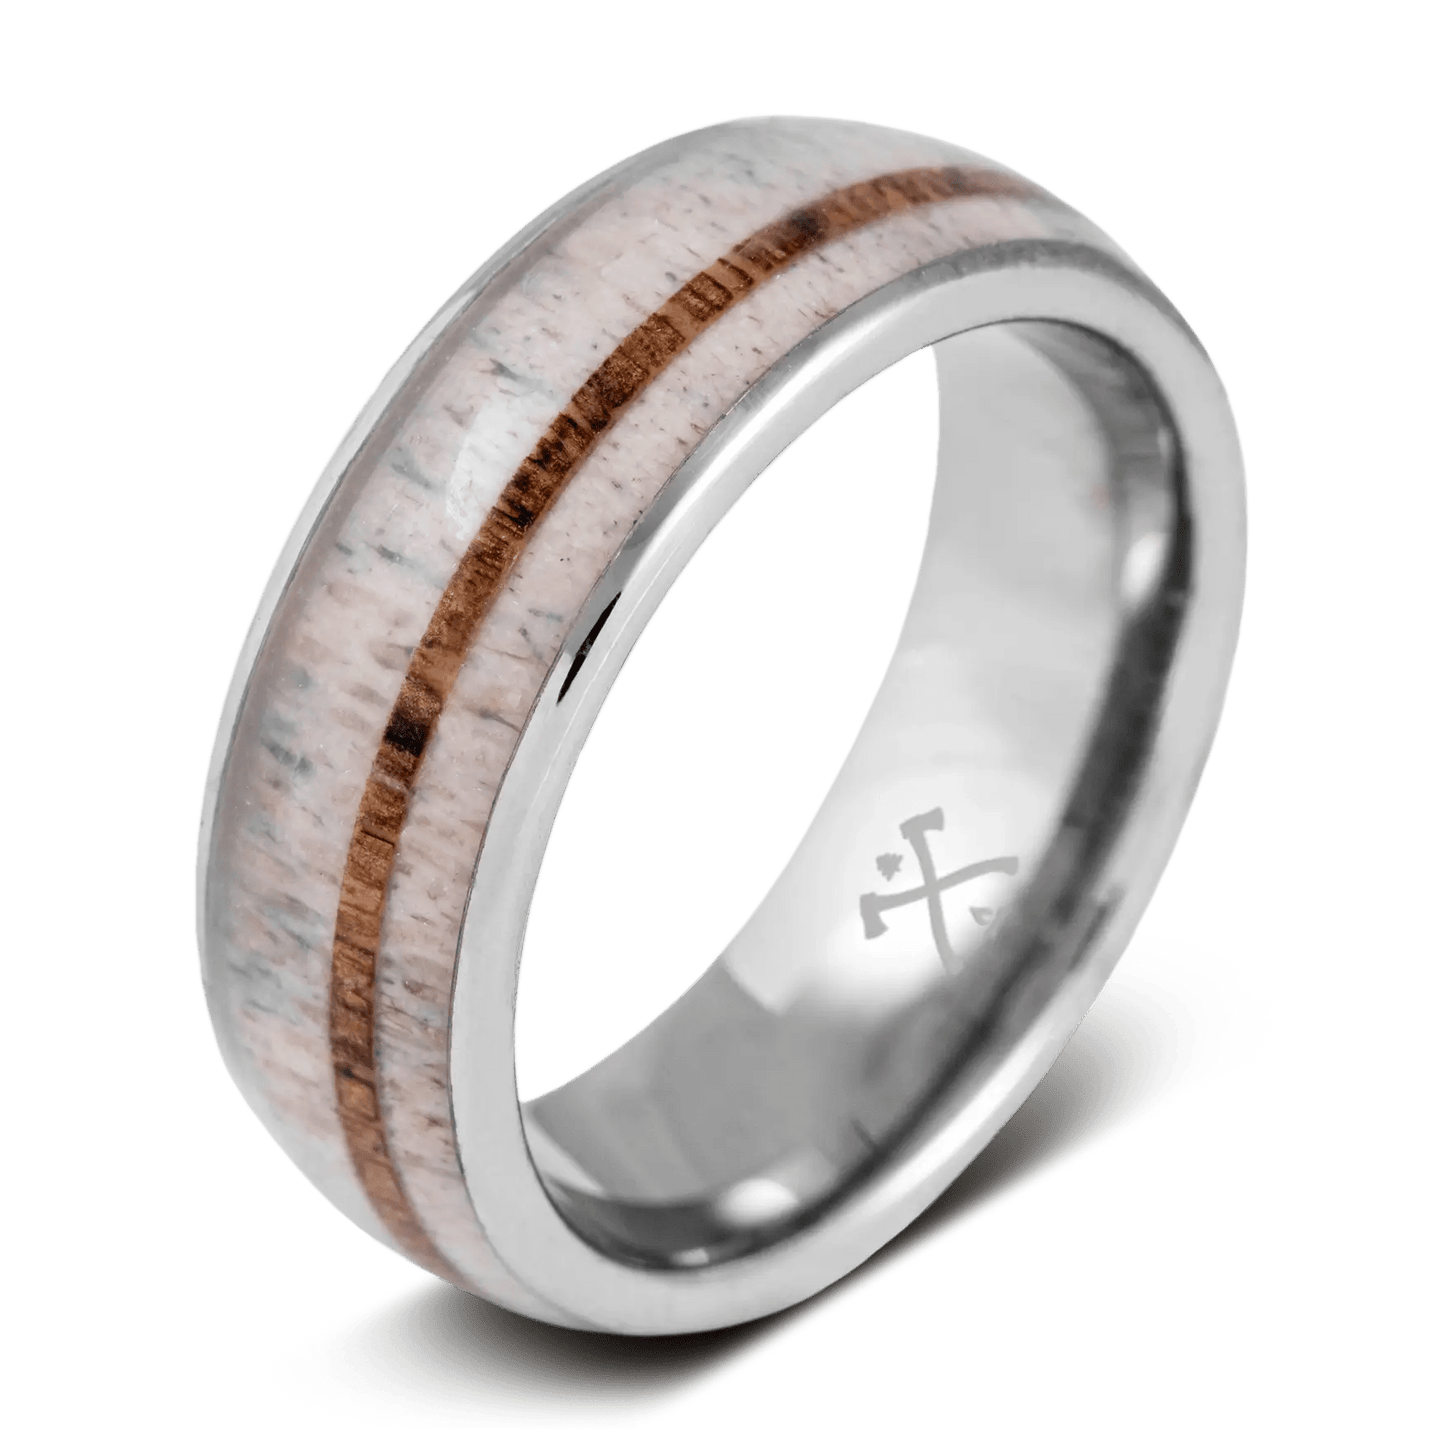 The Stag | Men's Antique Walnut Wood & Elk Antler Wedding Band with Dual Metal Inlays | Rustic and Main